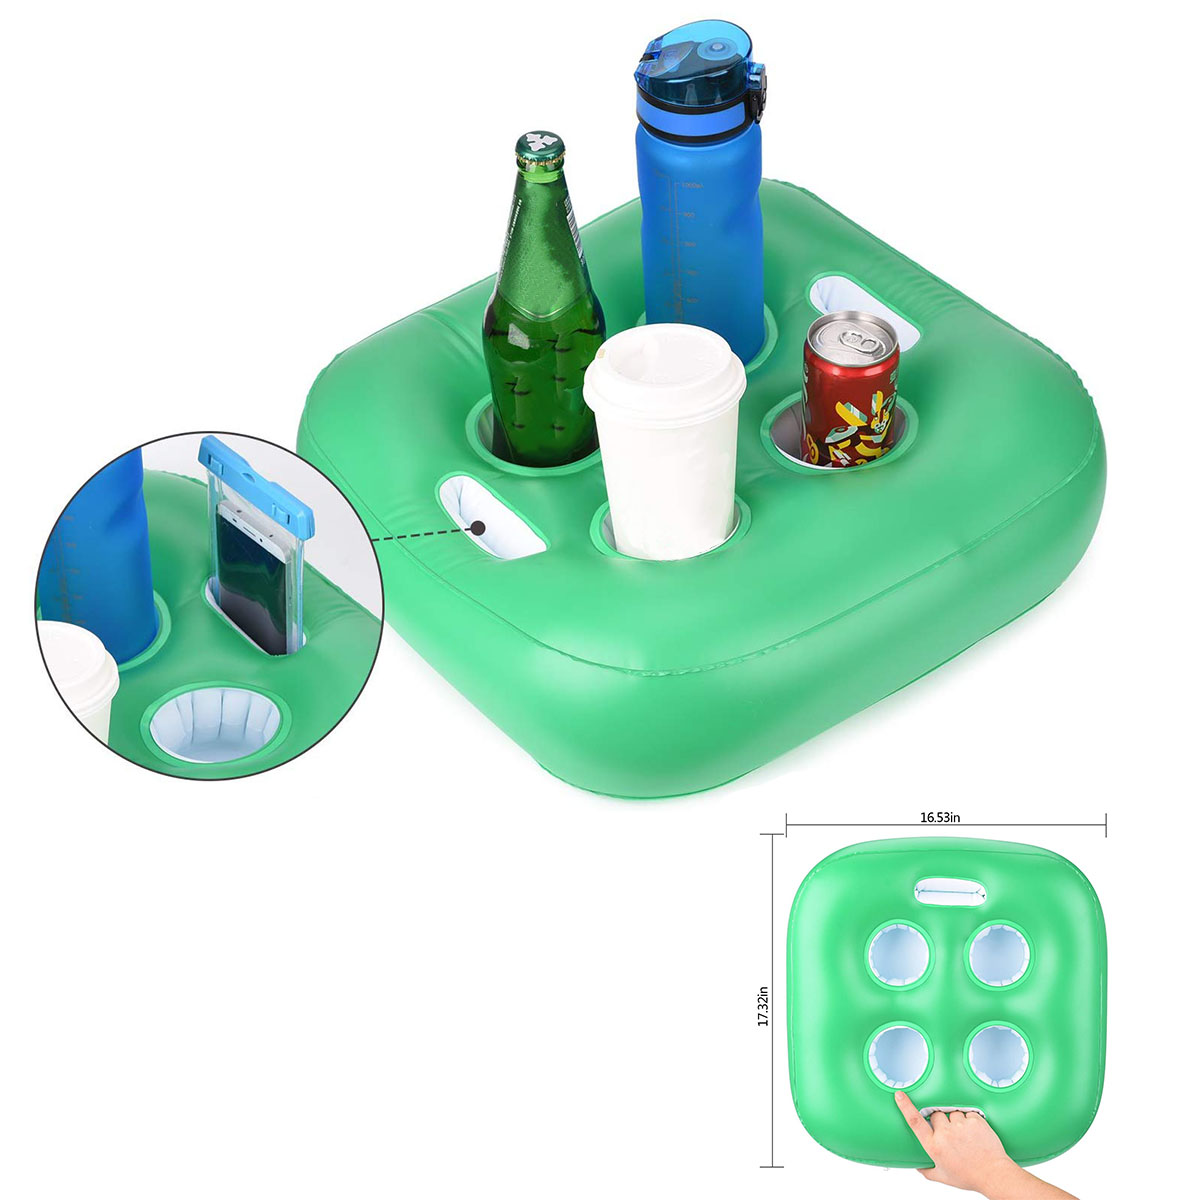 GL-AKL0124 Inflatable Floating Drink Holder with 6 Holes